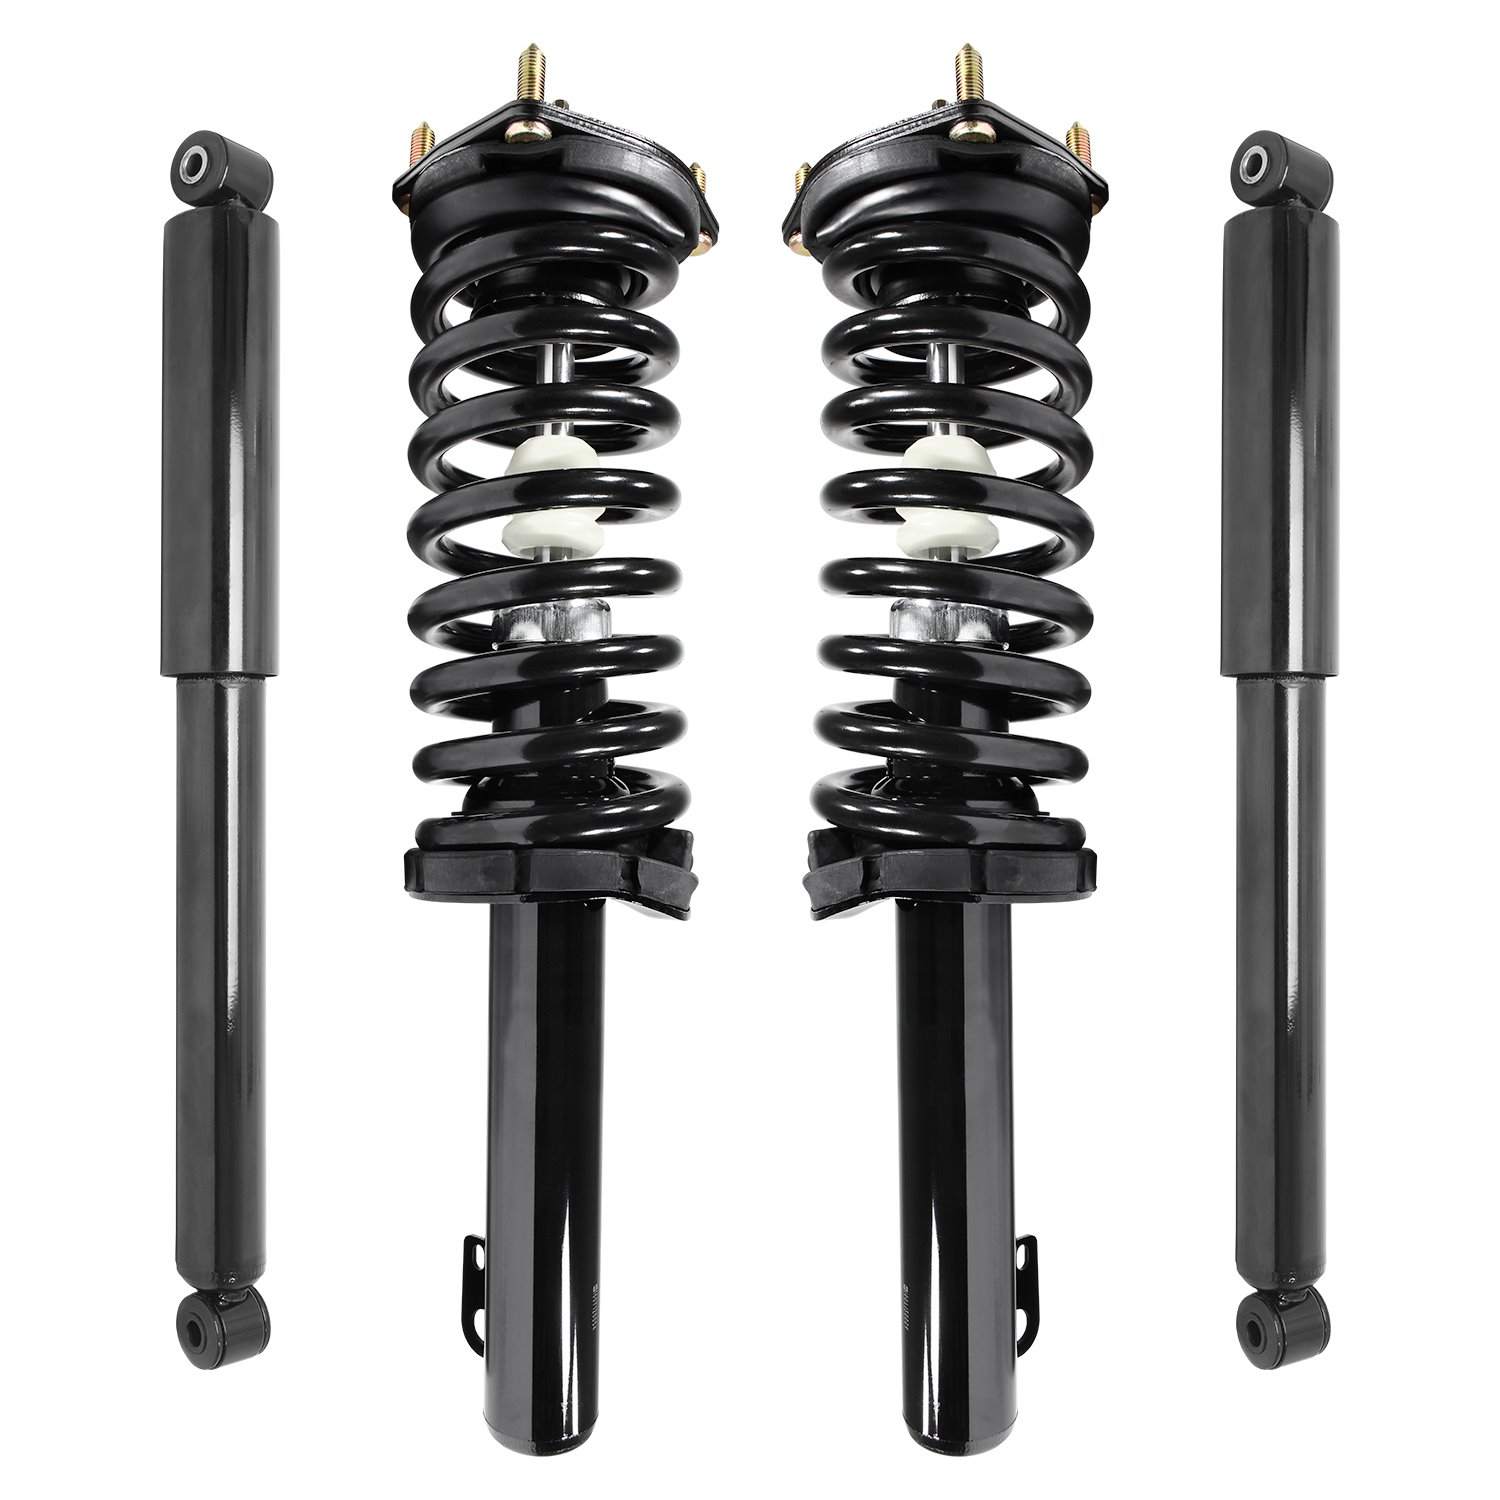 4-11211-259120-001 Front & Rear Suspension Strut & Coil Spring Assembly Fits Select Jeep Commander, Jeep Grand Cherokee